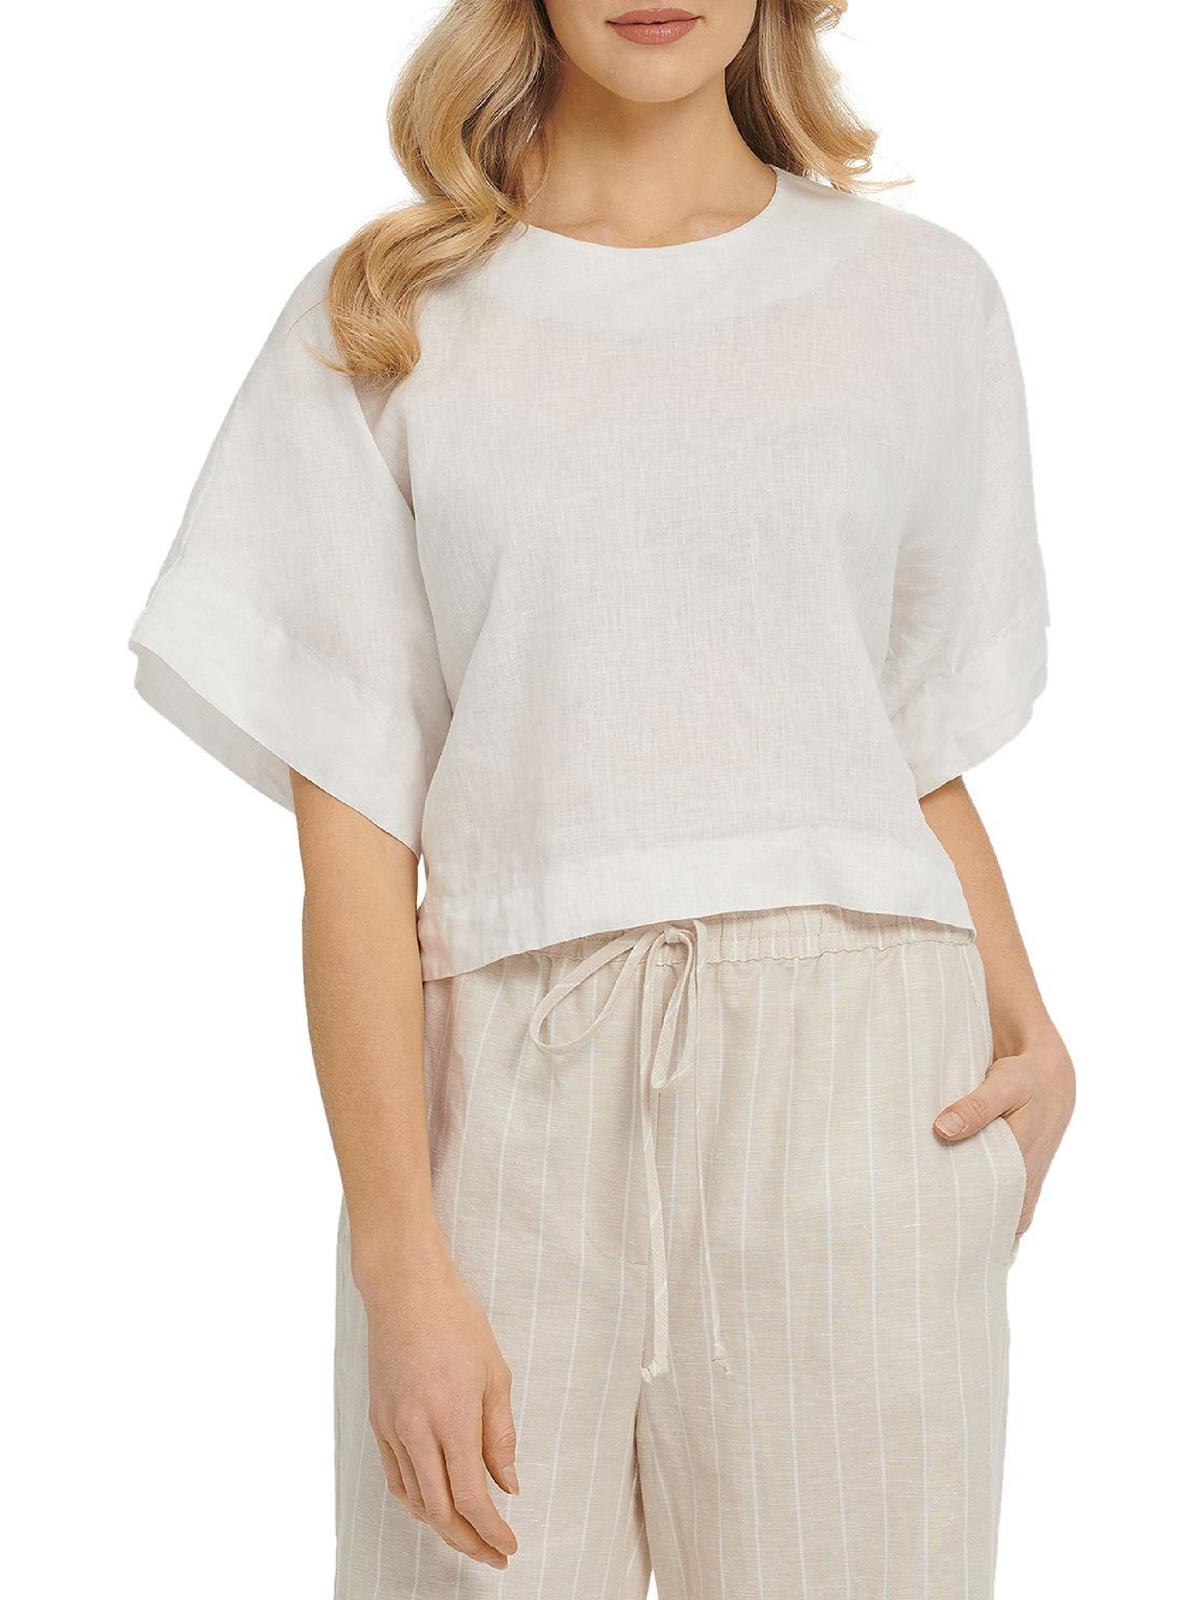 DKNY Womens Linen Cropped Blouse